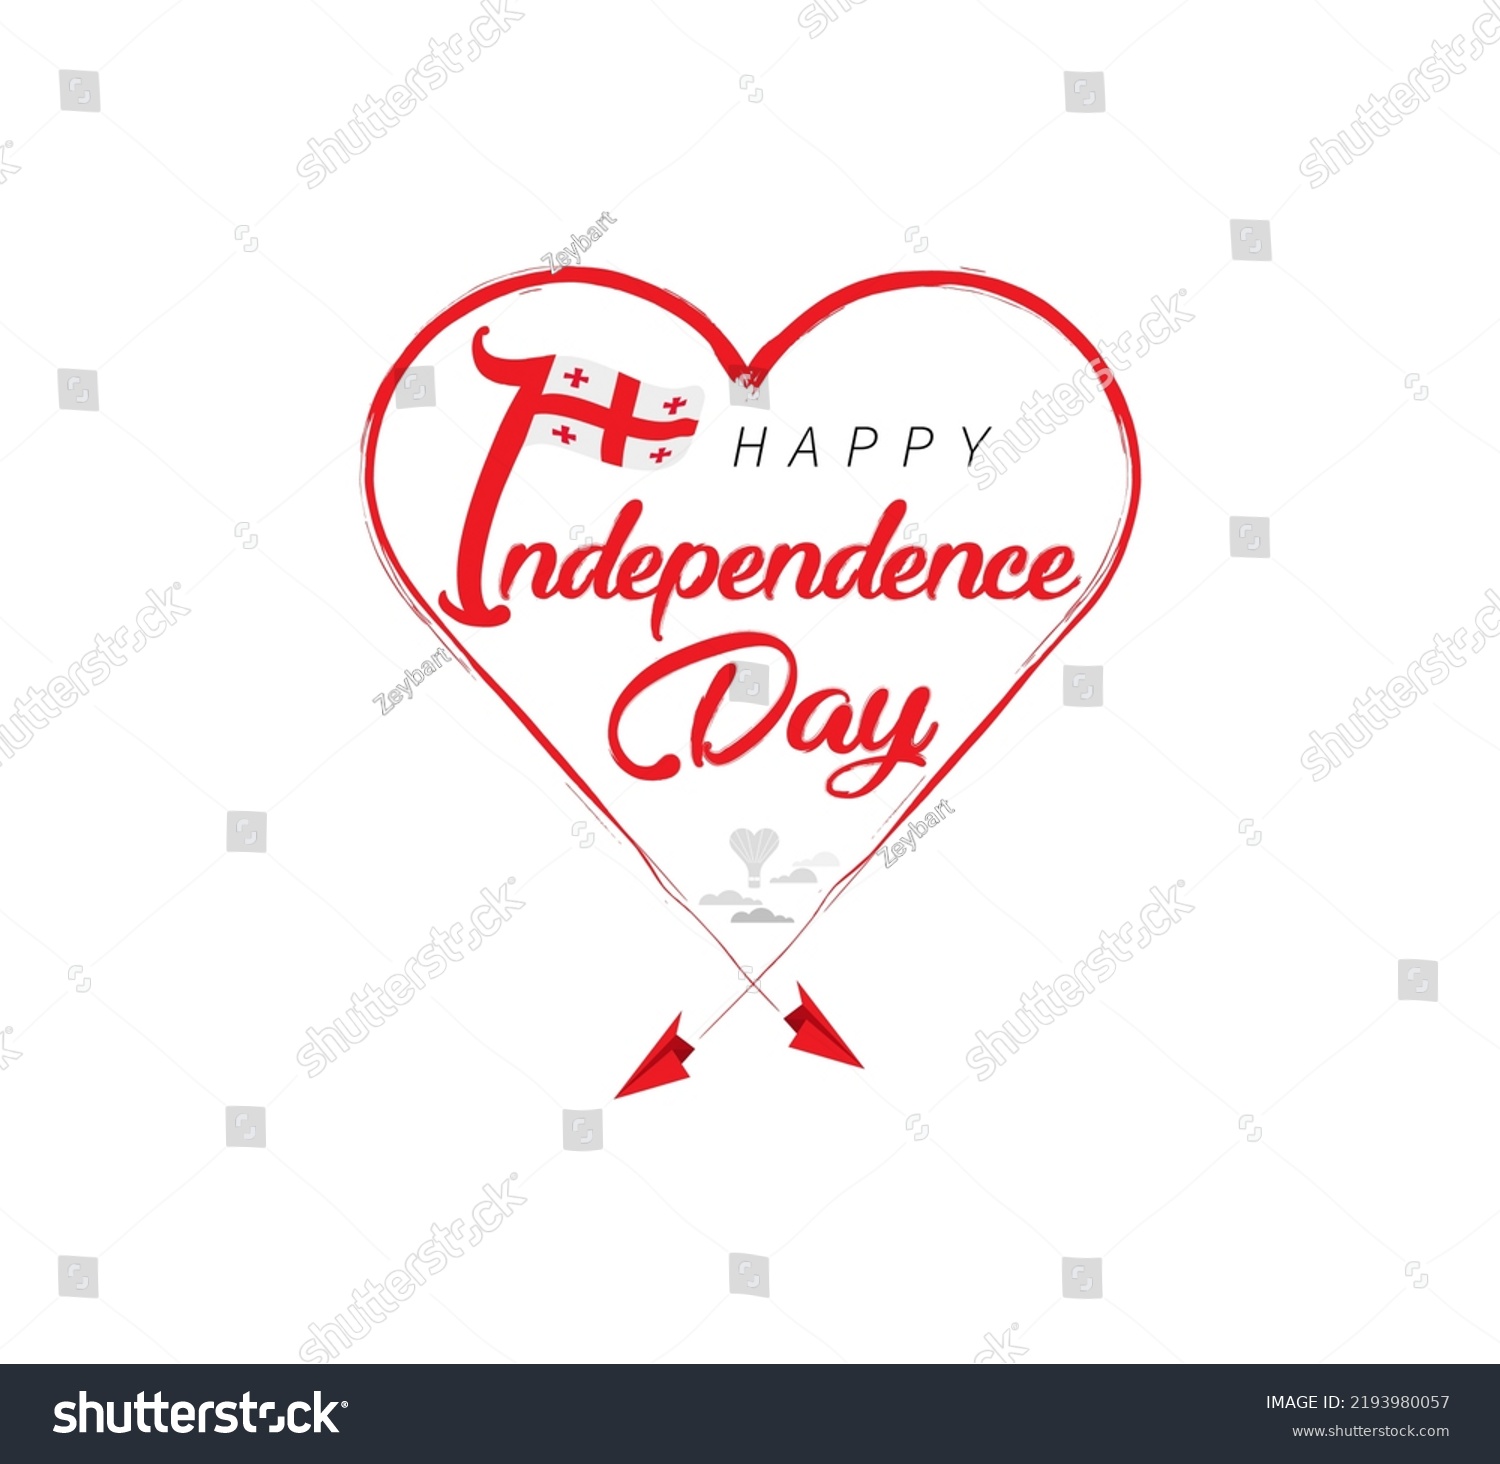 SVG of happy independence day of Georgia. Airplane draws cloud from heart. National flag vector illustration on white background. svg